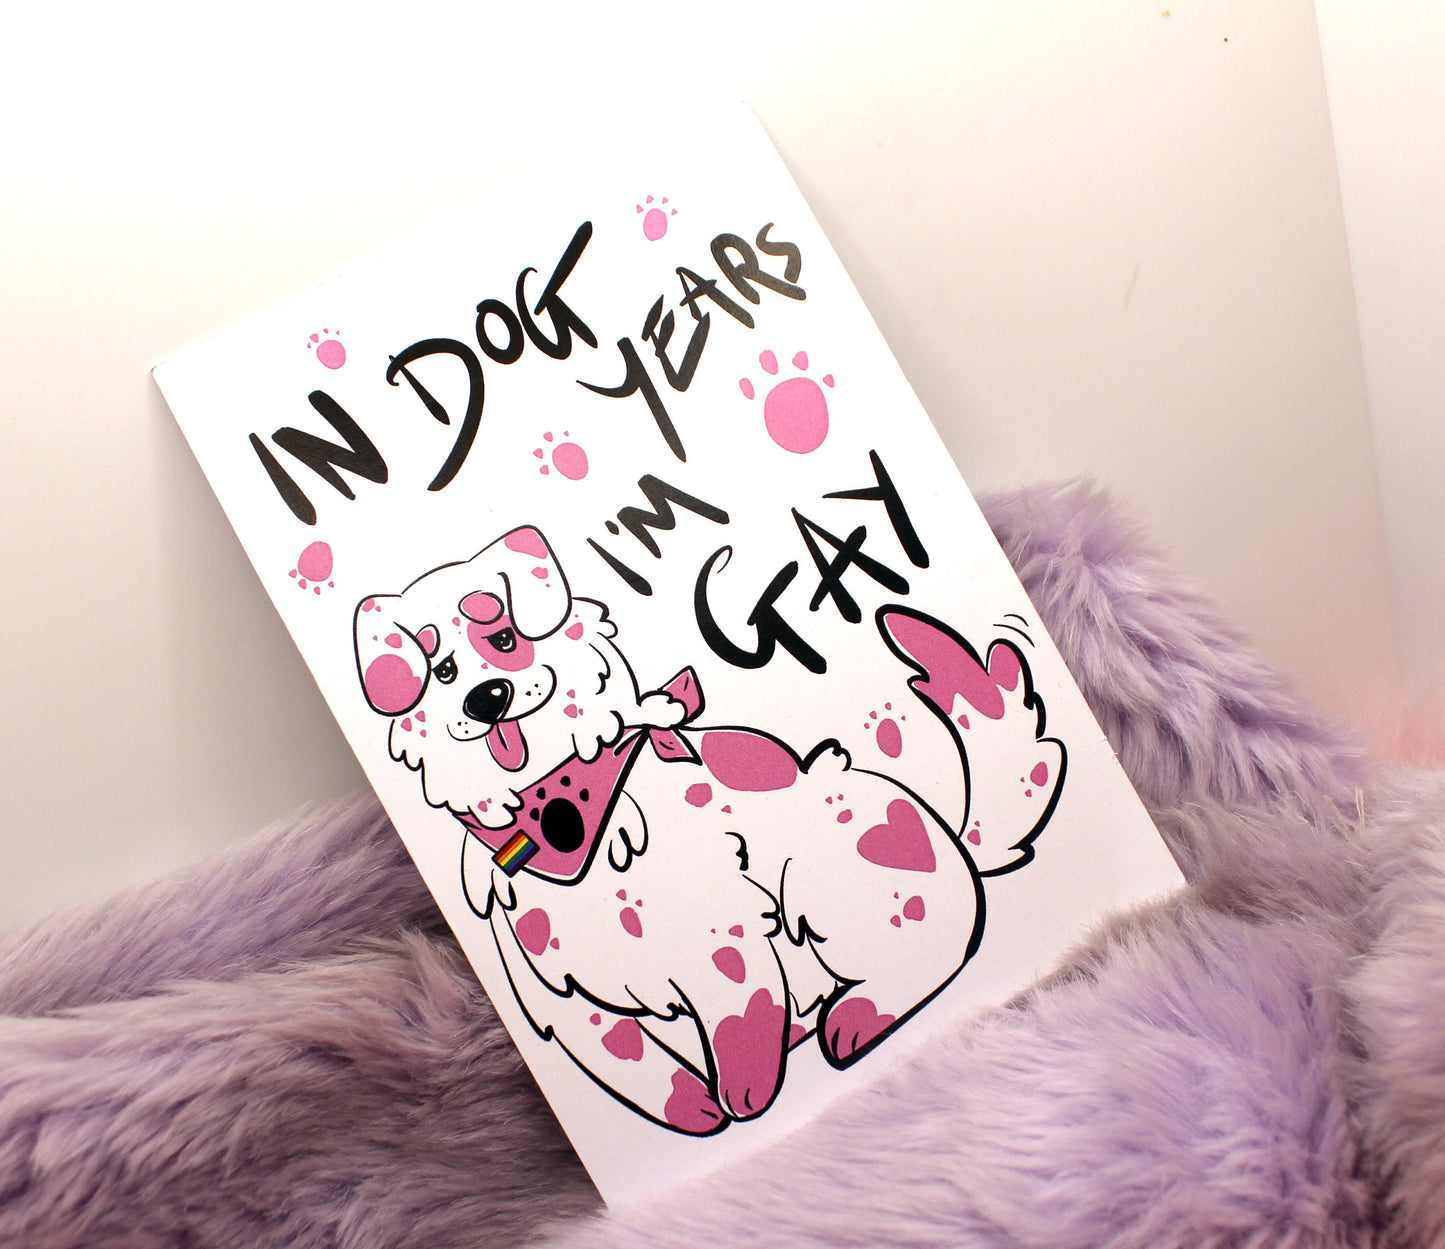 In Dog Years I'm Gay A6 Print